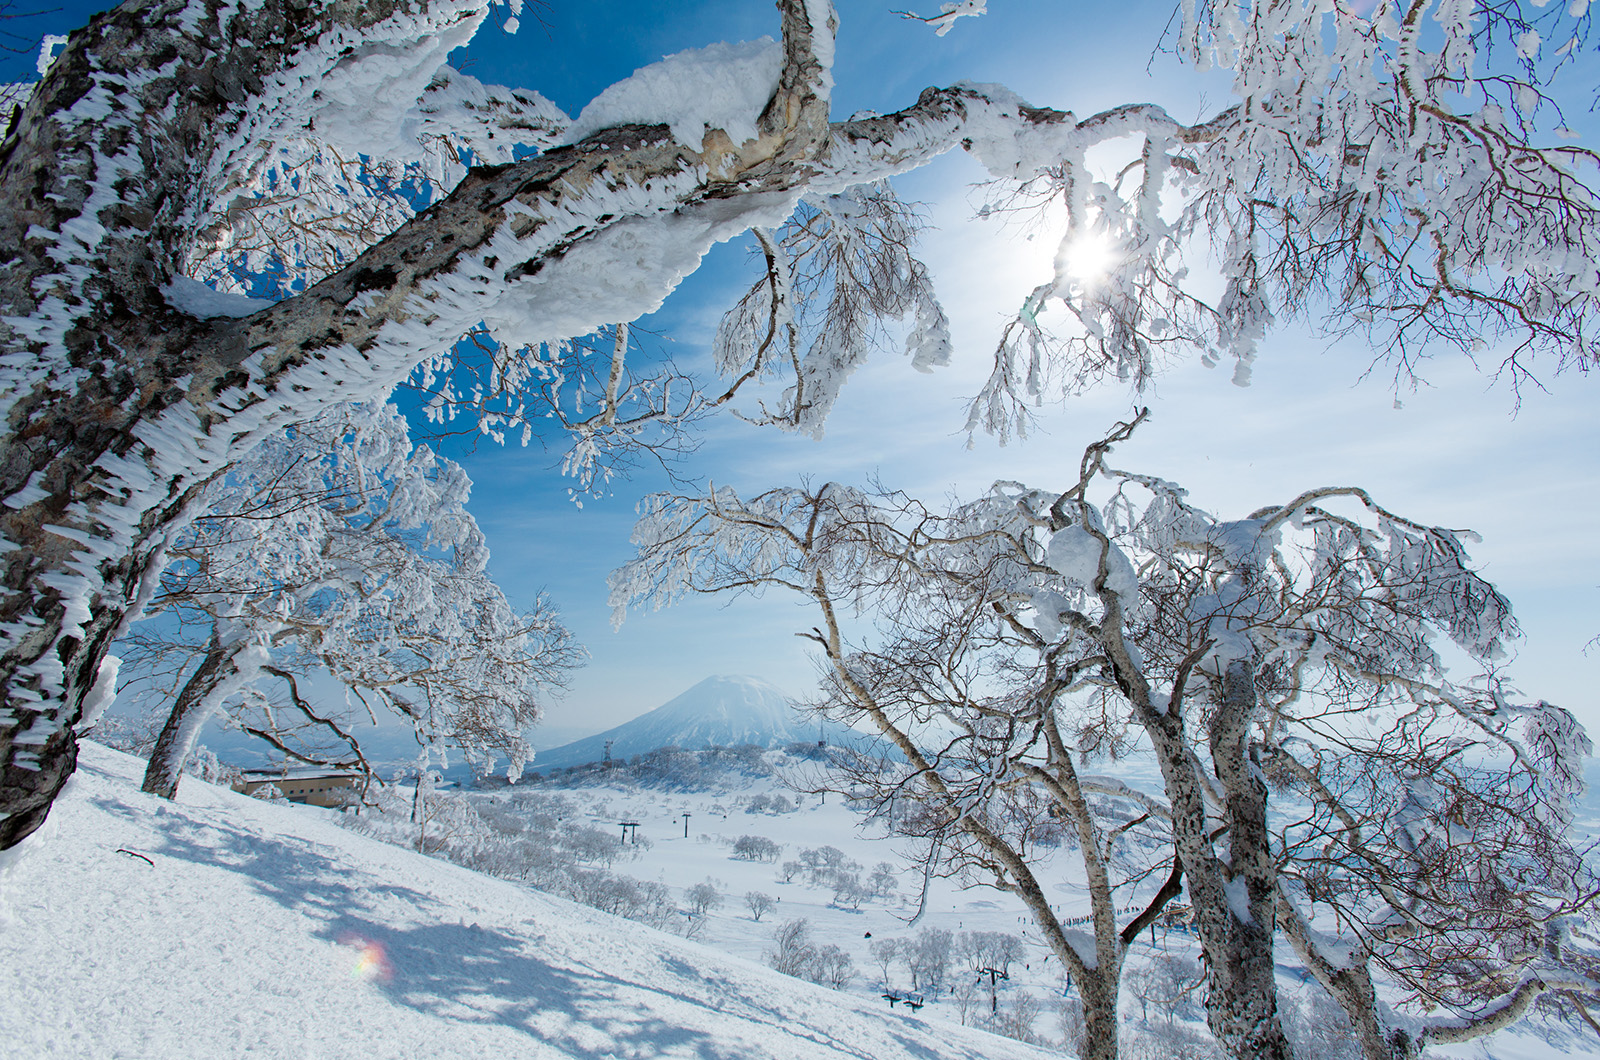 Plentiful snowfall is forecasted across Japan for winter 2022/23の画像